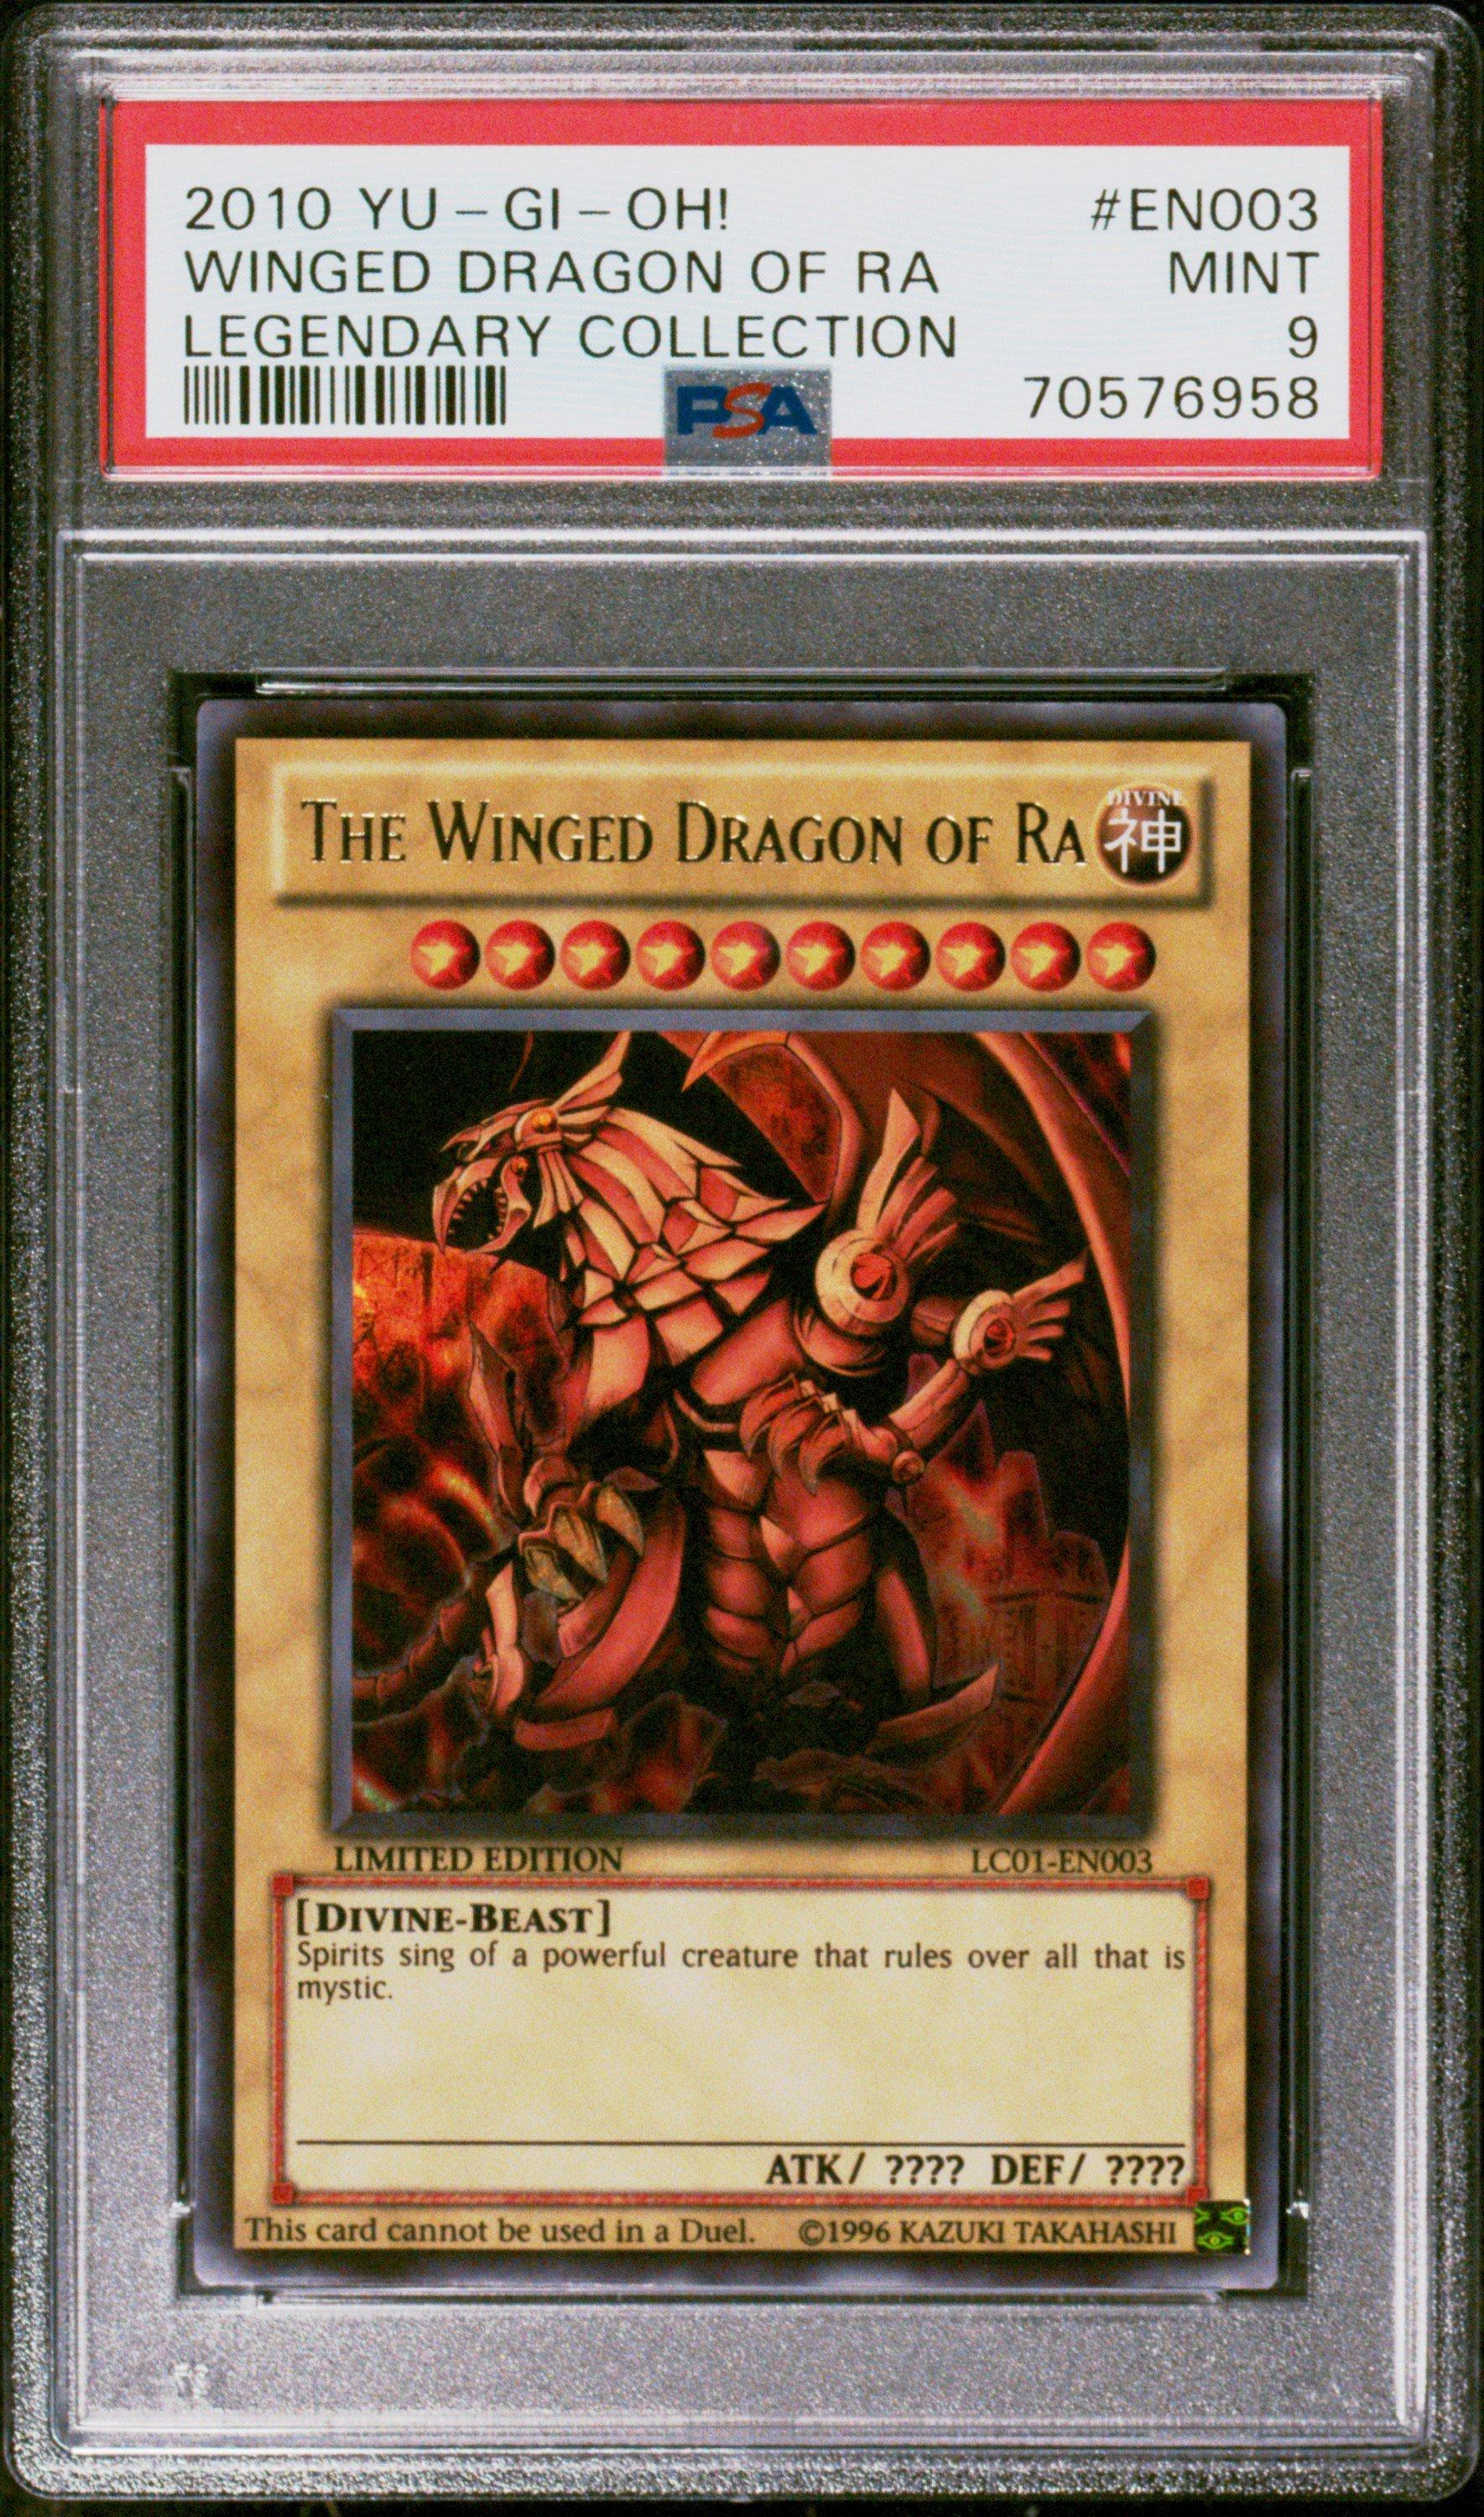 2010 Yu-gi-oh! Legendary Collection En003 Winged Dragon Of Ra PSA